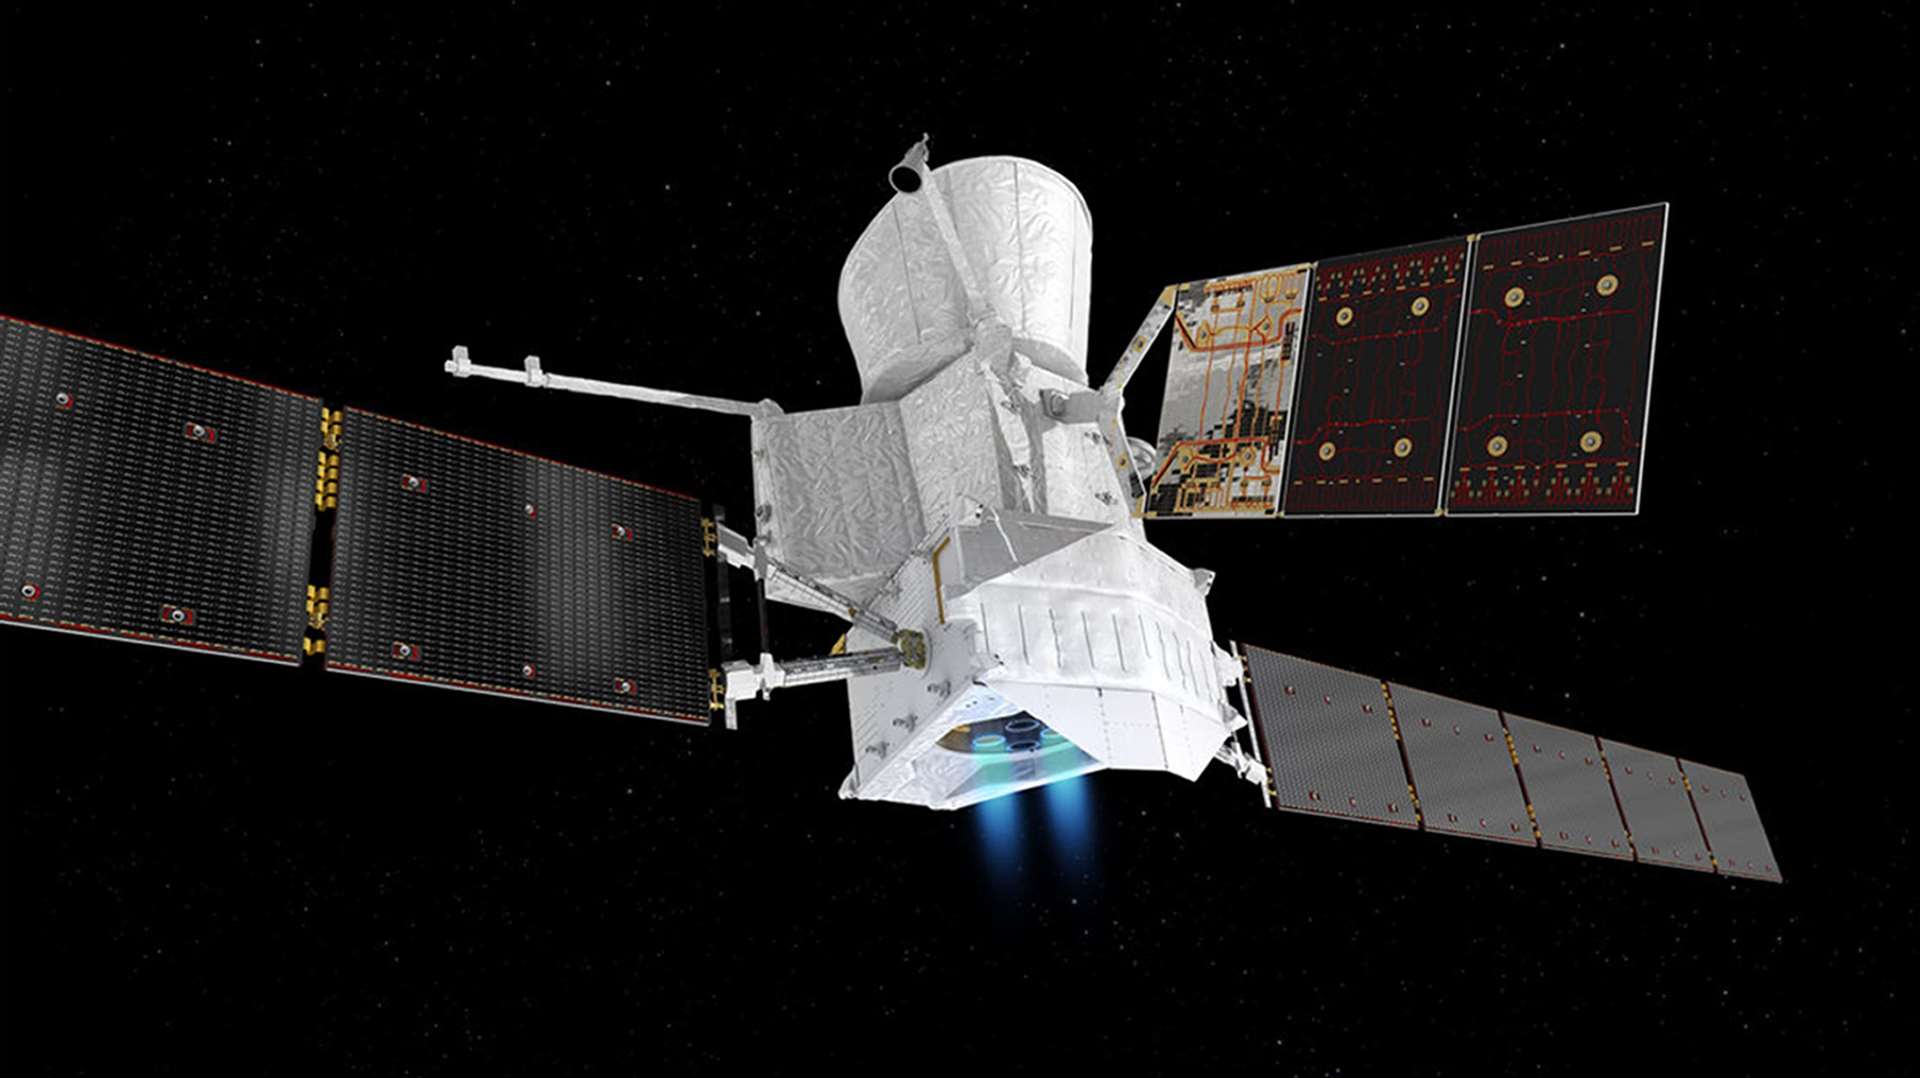 An artist impression issued by the ESA of BepiColombo in ‘cruise mode’ on its way to Mercury (ESA/ATG medialab)